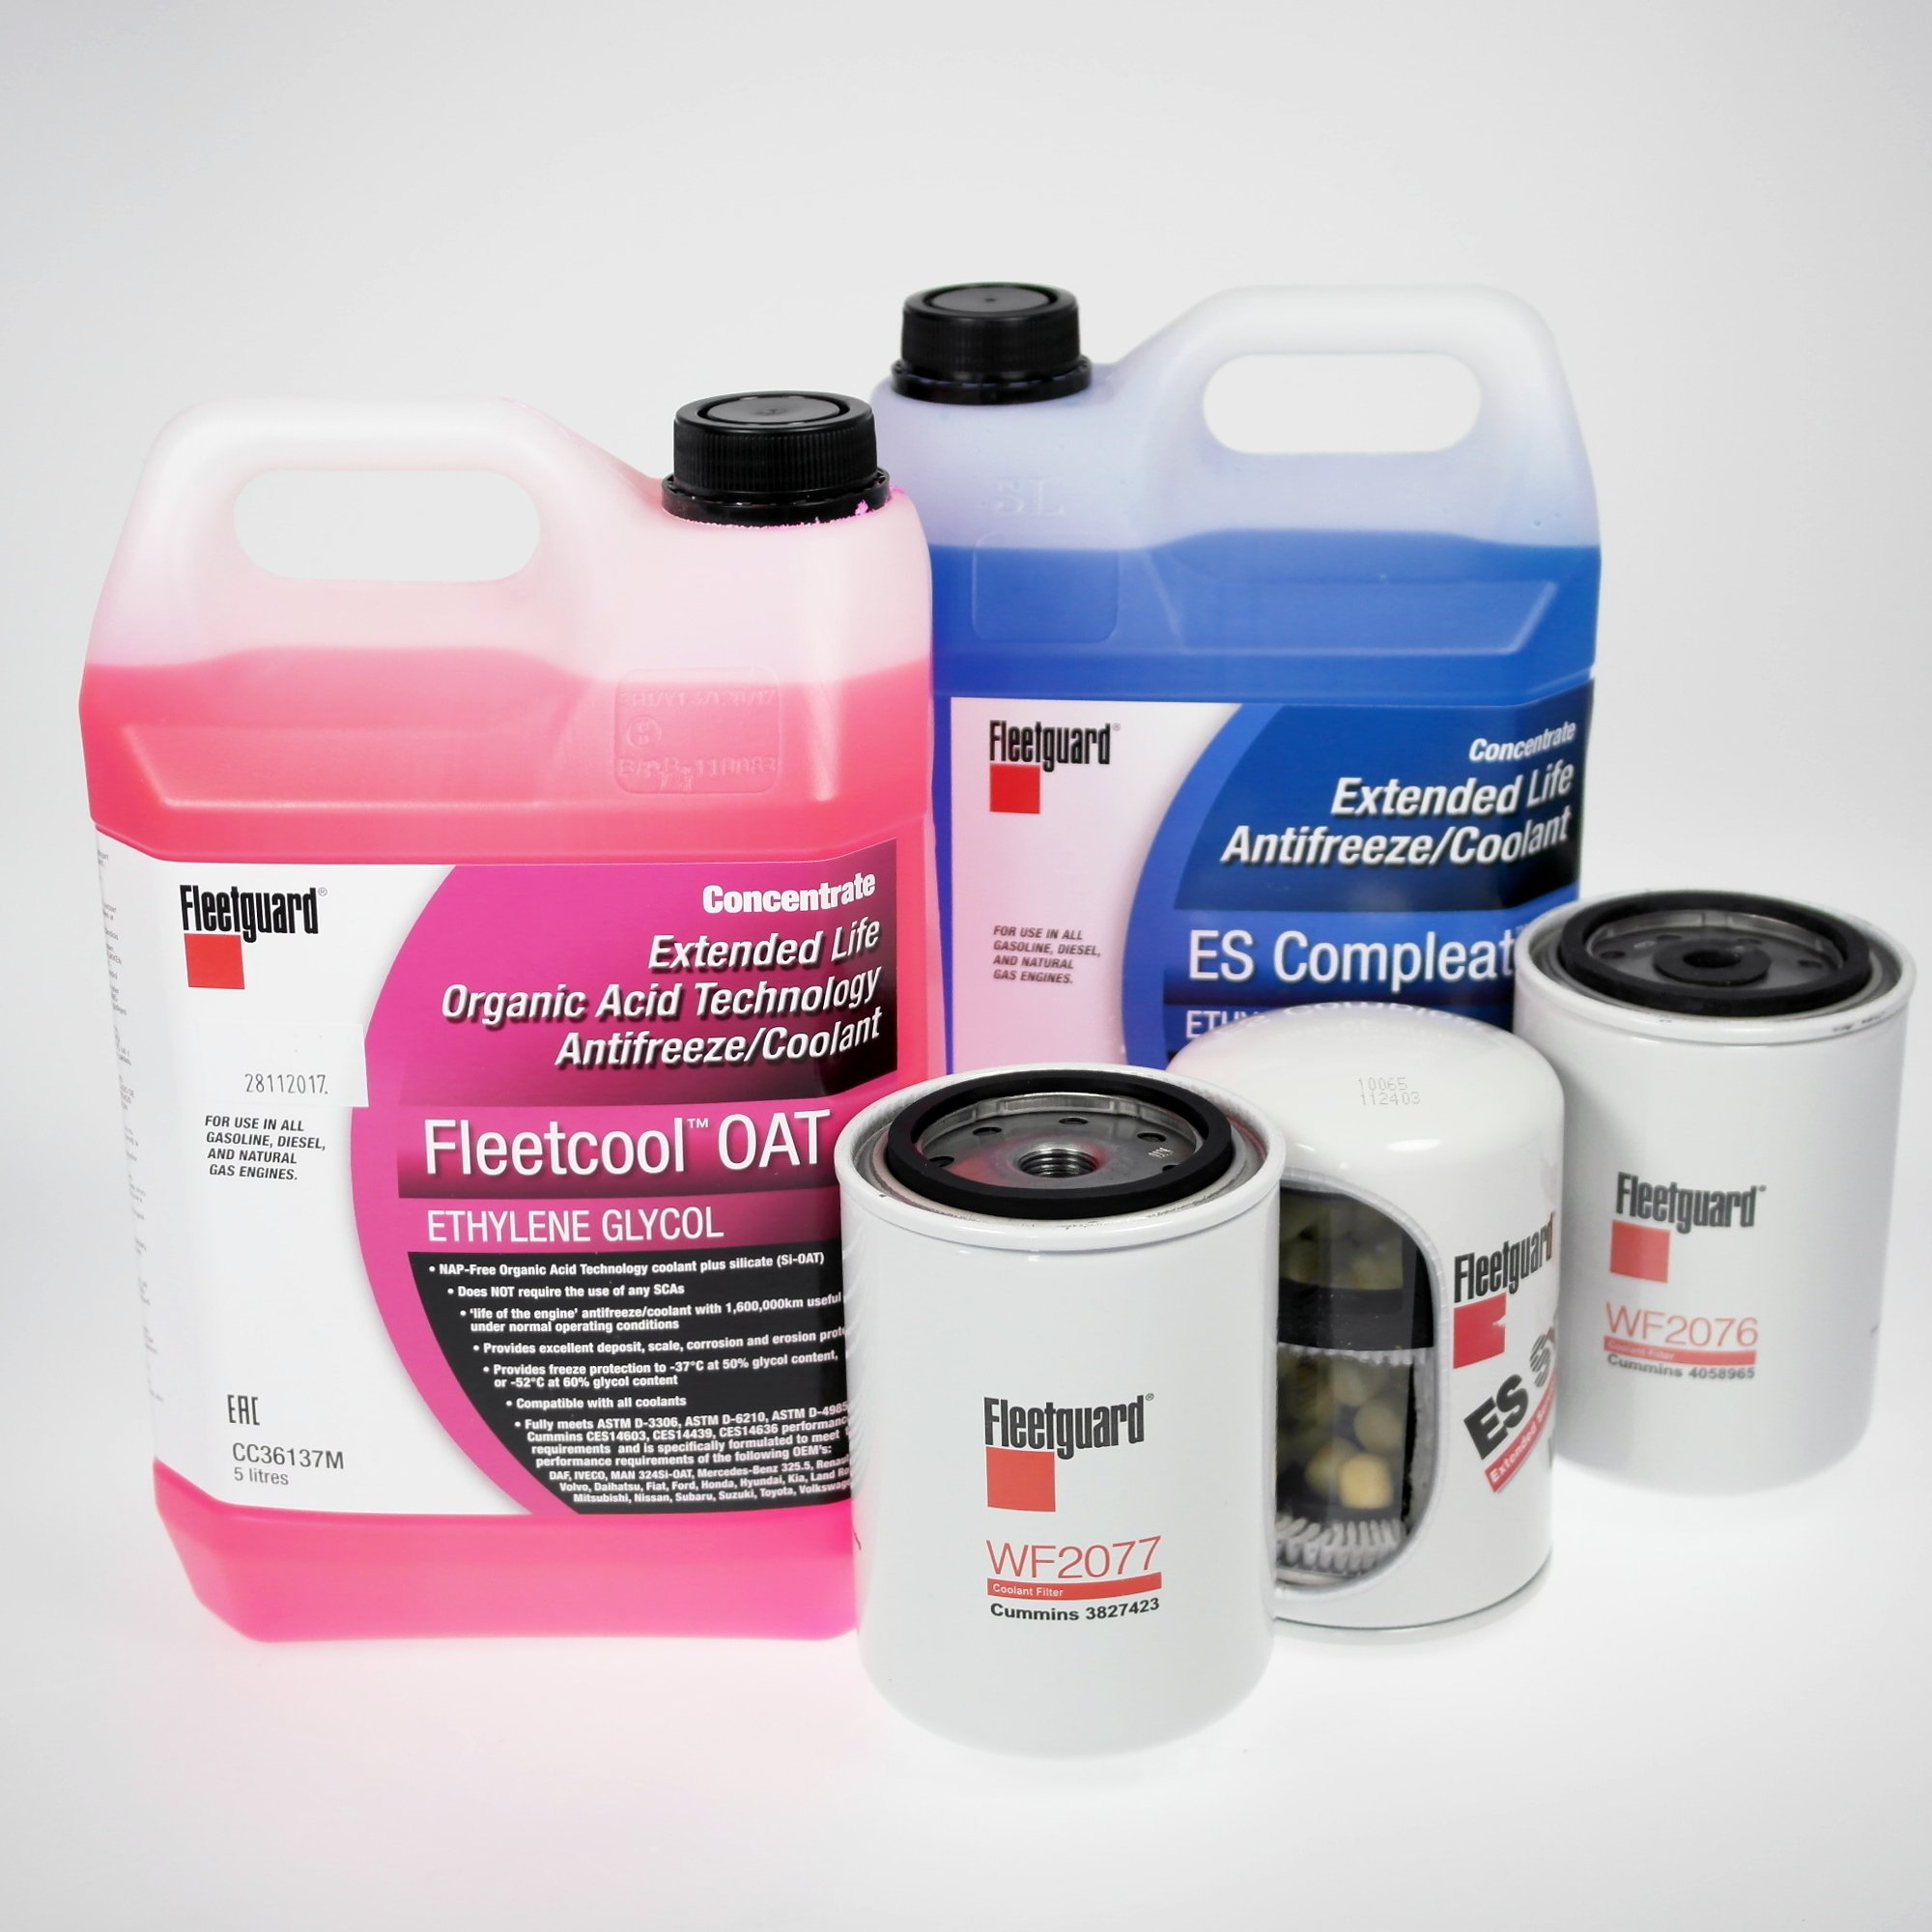 Fleetguard coolants have the best warranty coverage - Lekang Group